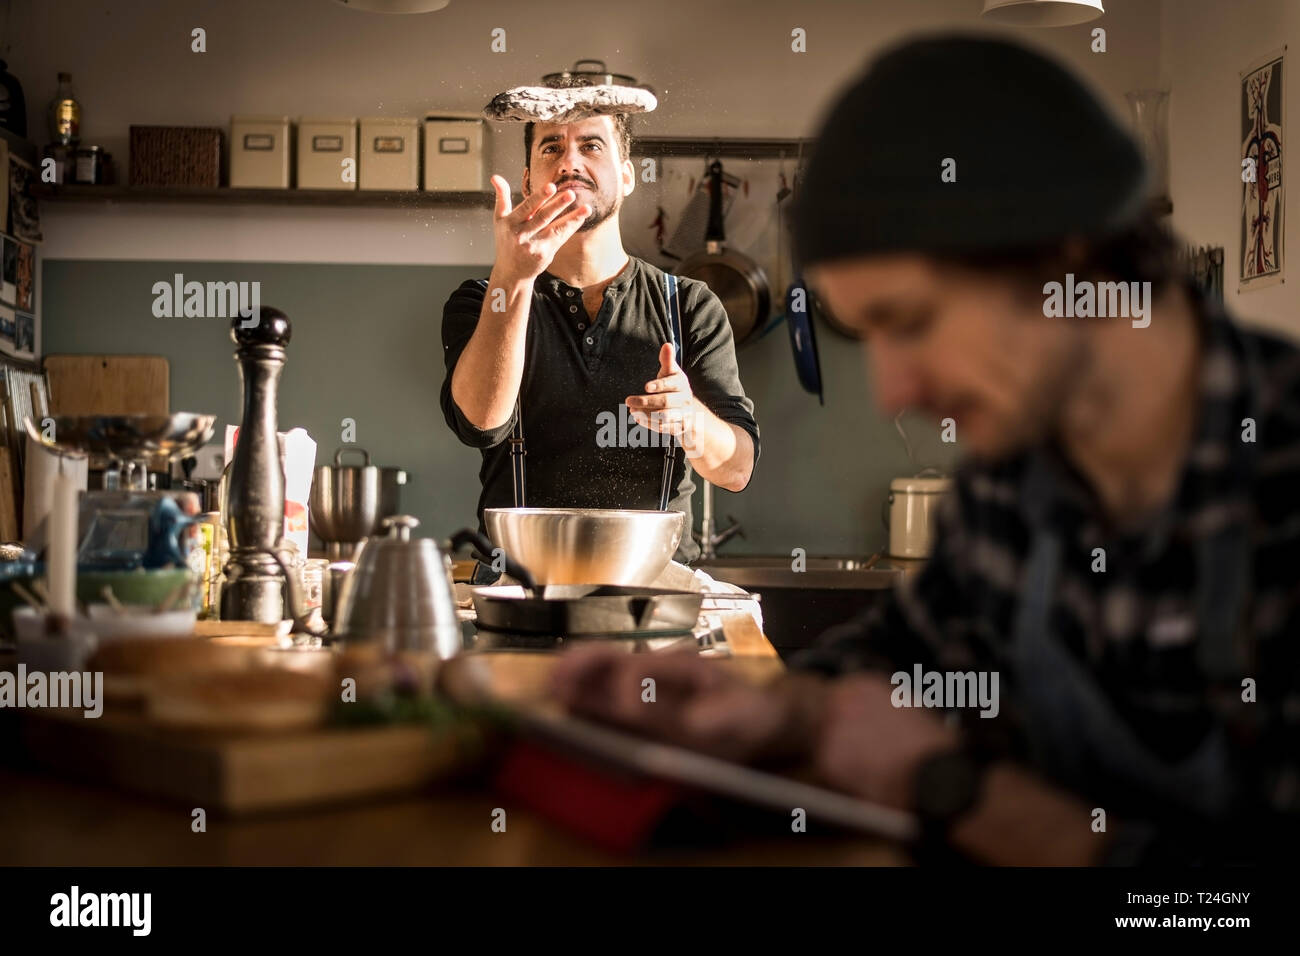 One man preparing bread dough while the other is using his digital tablet Stock Photo